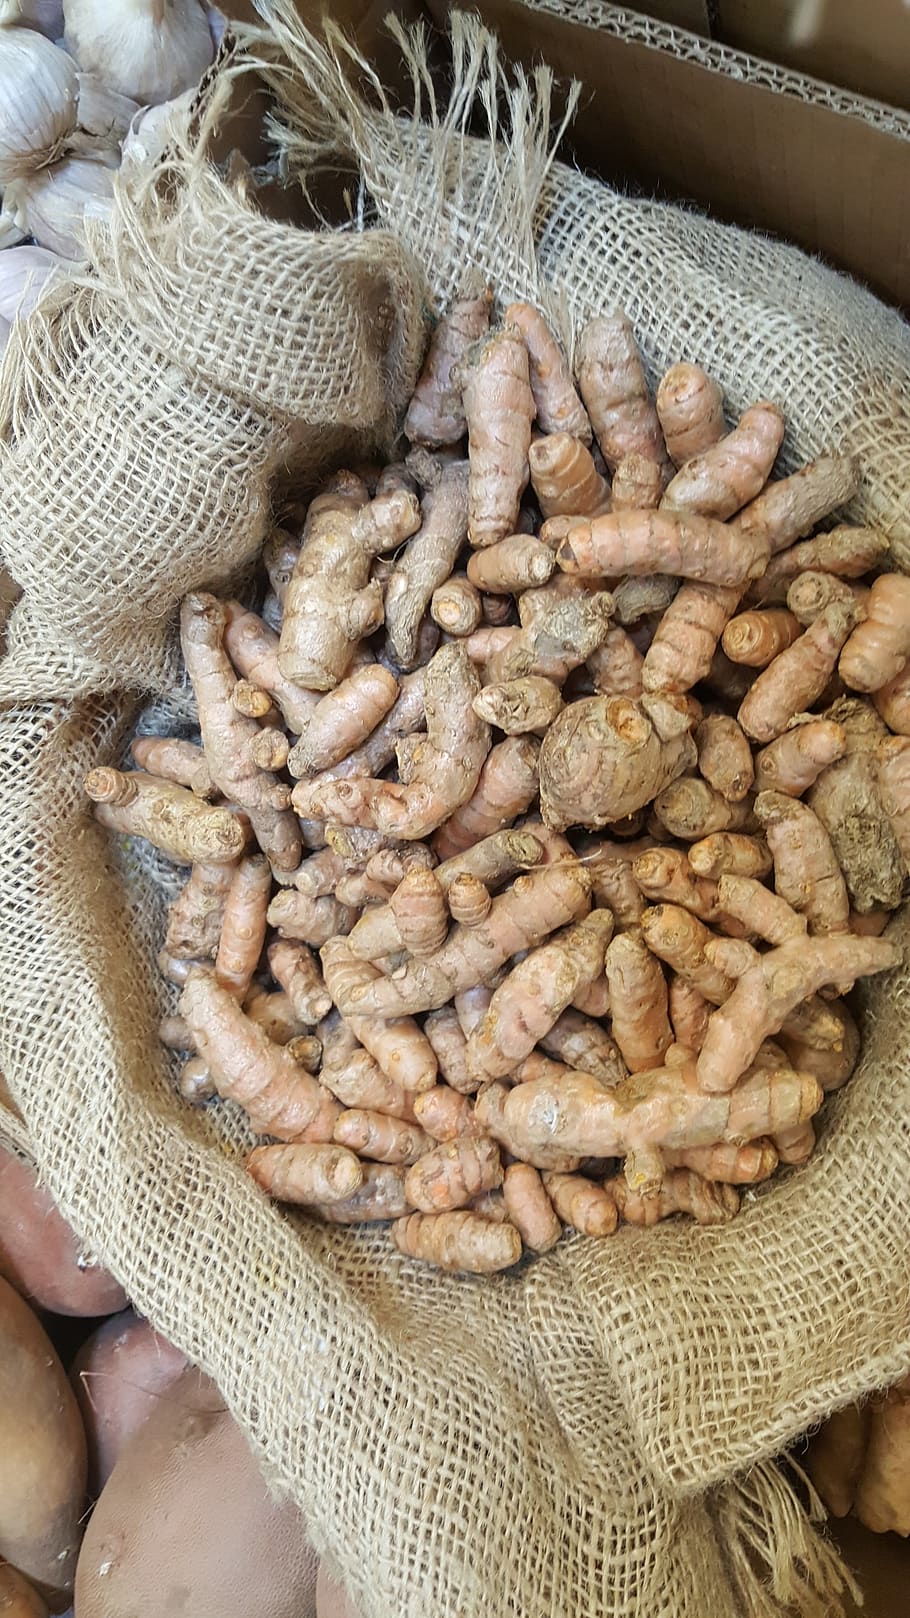 turmeric, bulk, spice, cuisine, natural, healthy, food and drink, food, freshness, large group of objects